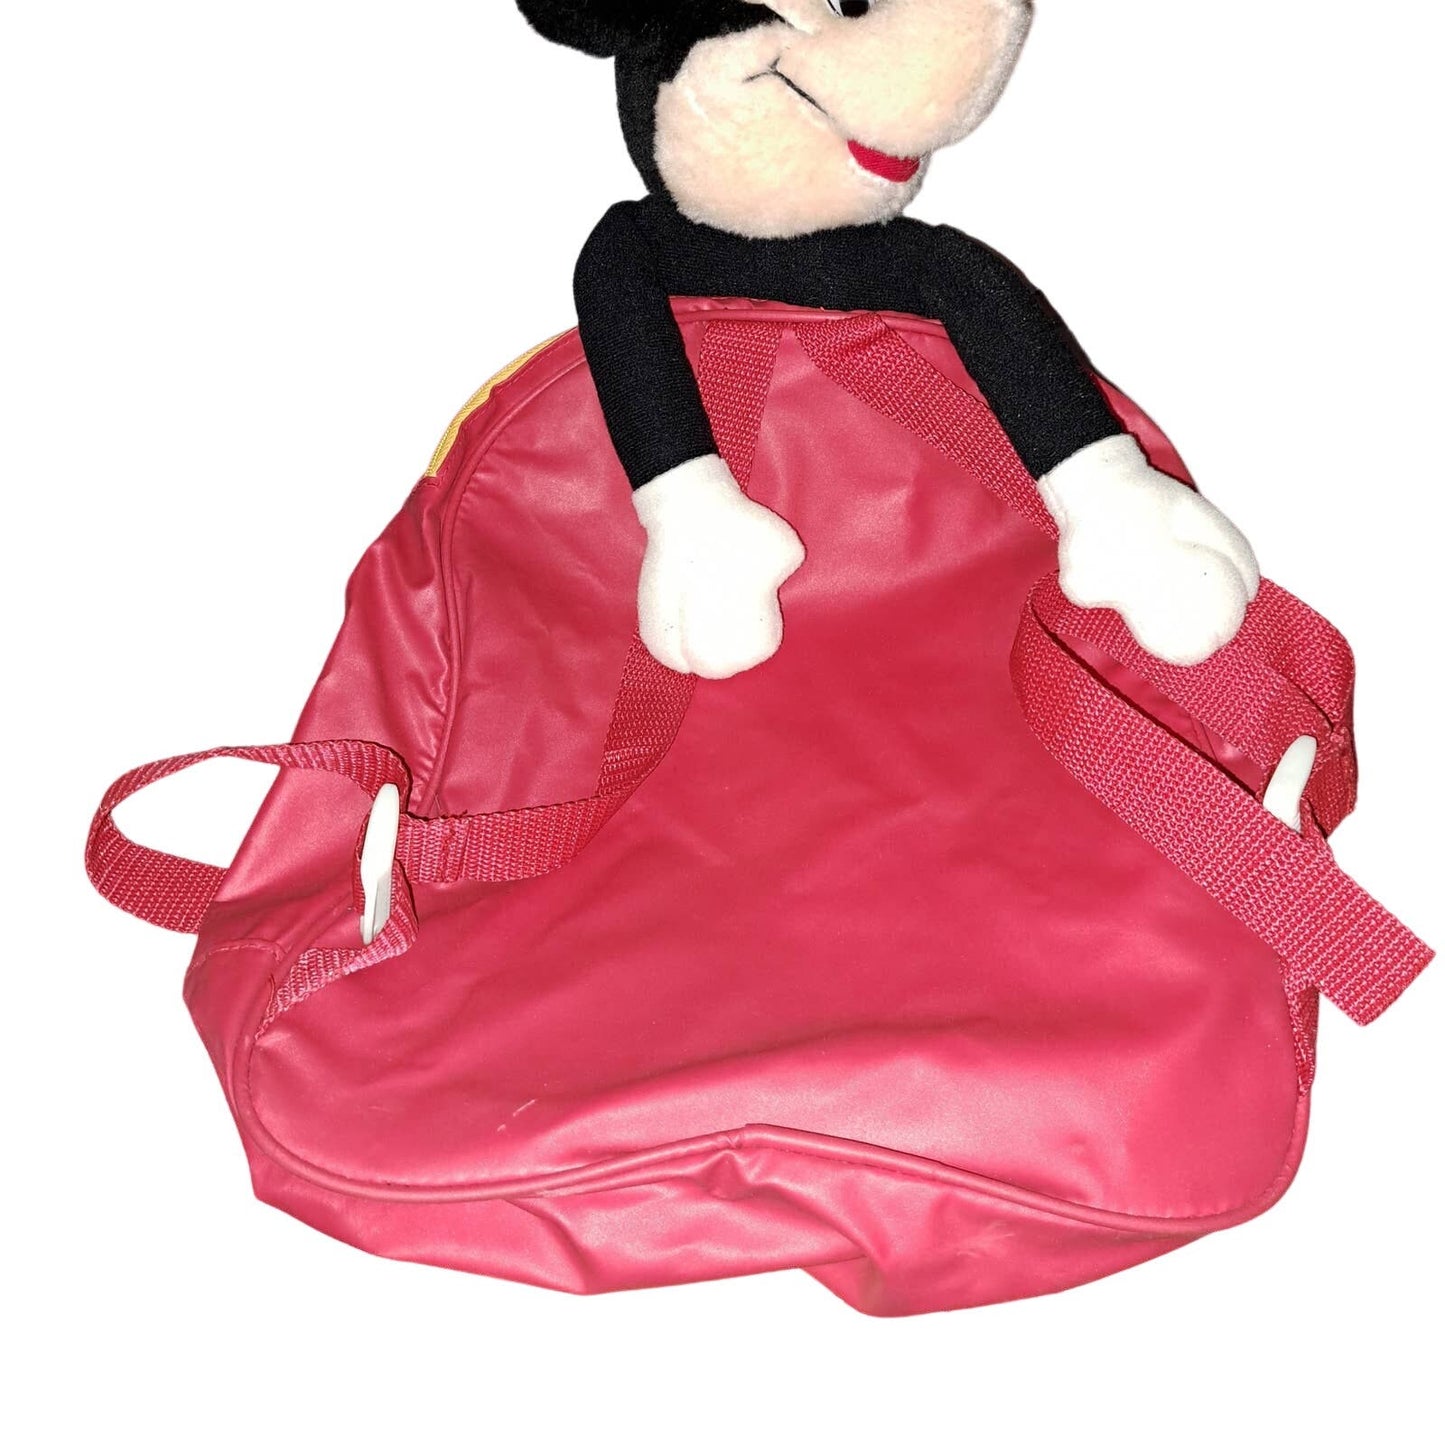 SALE!!! Mickey Mouse toddler Backpack